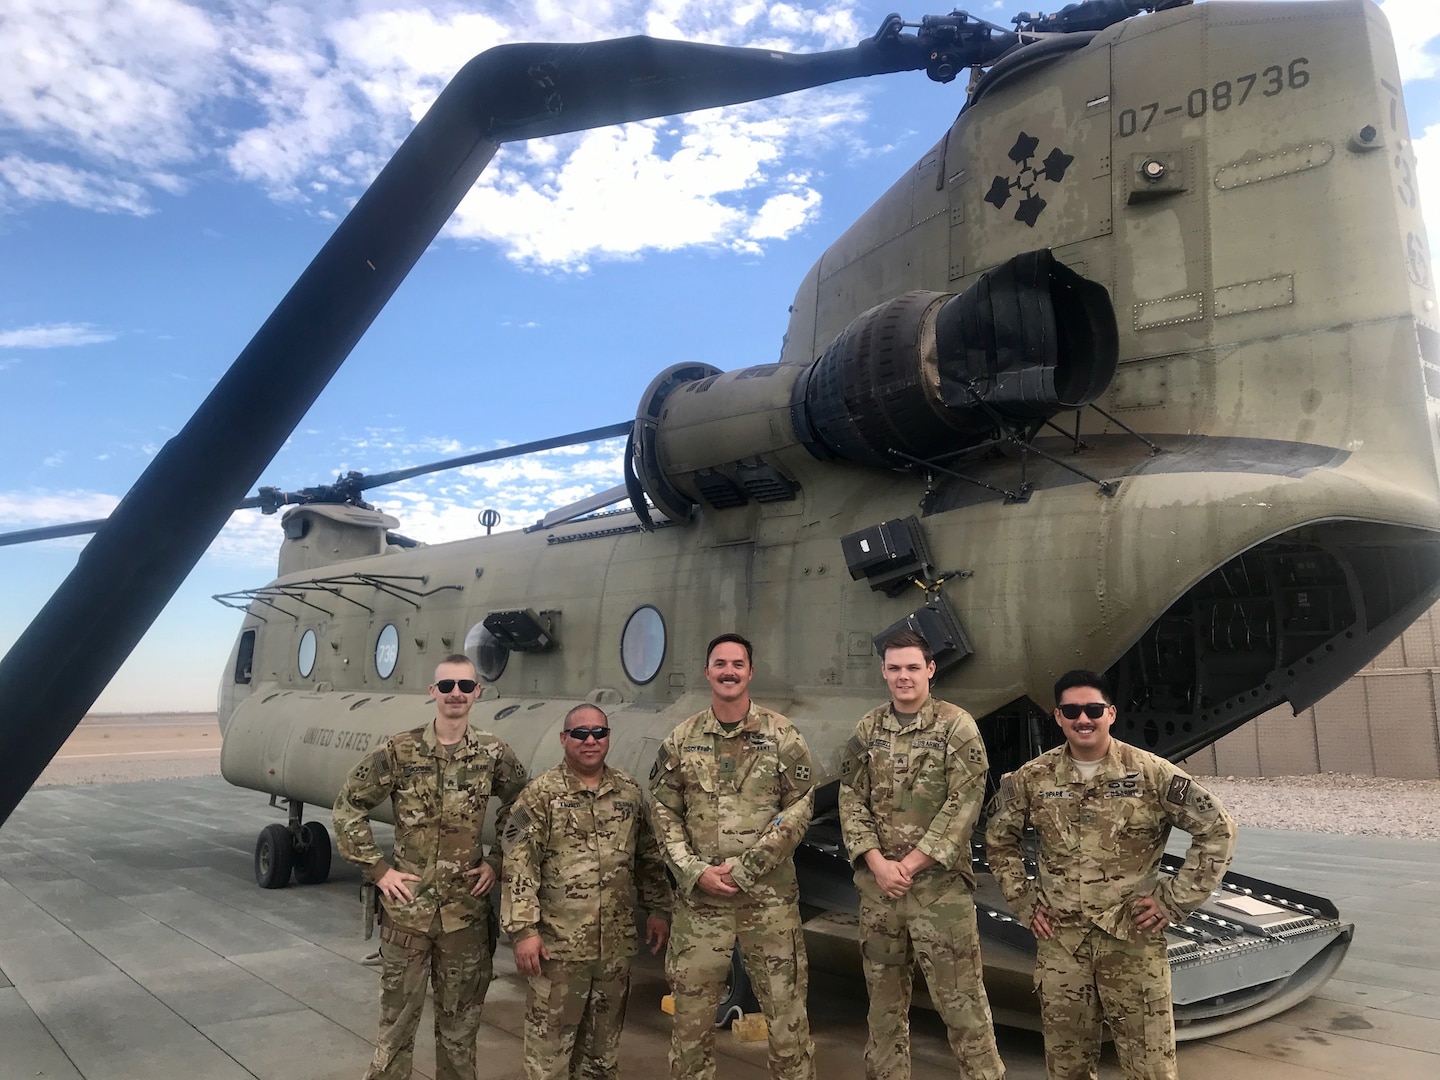 Five Washington National Guard crew members pose in front of their CH-47 Chinook helicopter, damaged in Afghanistan Nov. 20, 2020. All five were awarded the U.S. Army Aviation Broken Wing Award  in a ceremony at the Army Aviation Support Facility #1 at Joint Base Lewis-McChord June 18, 2022.